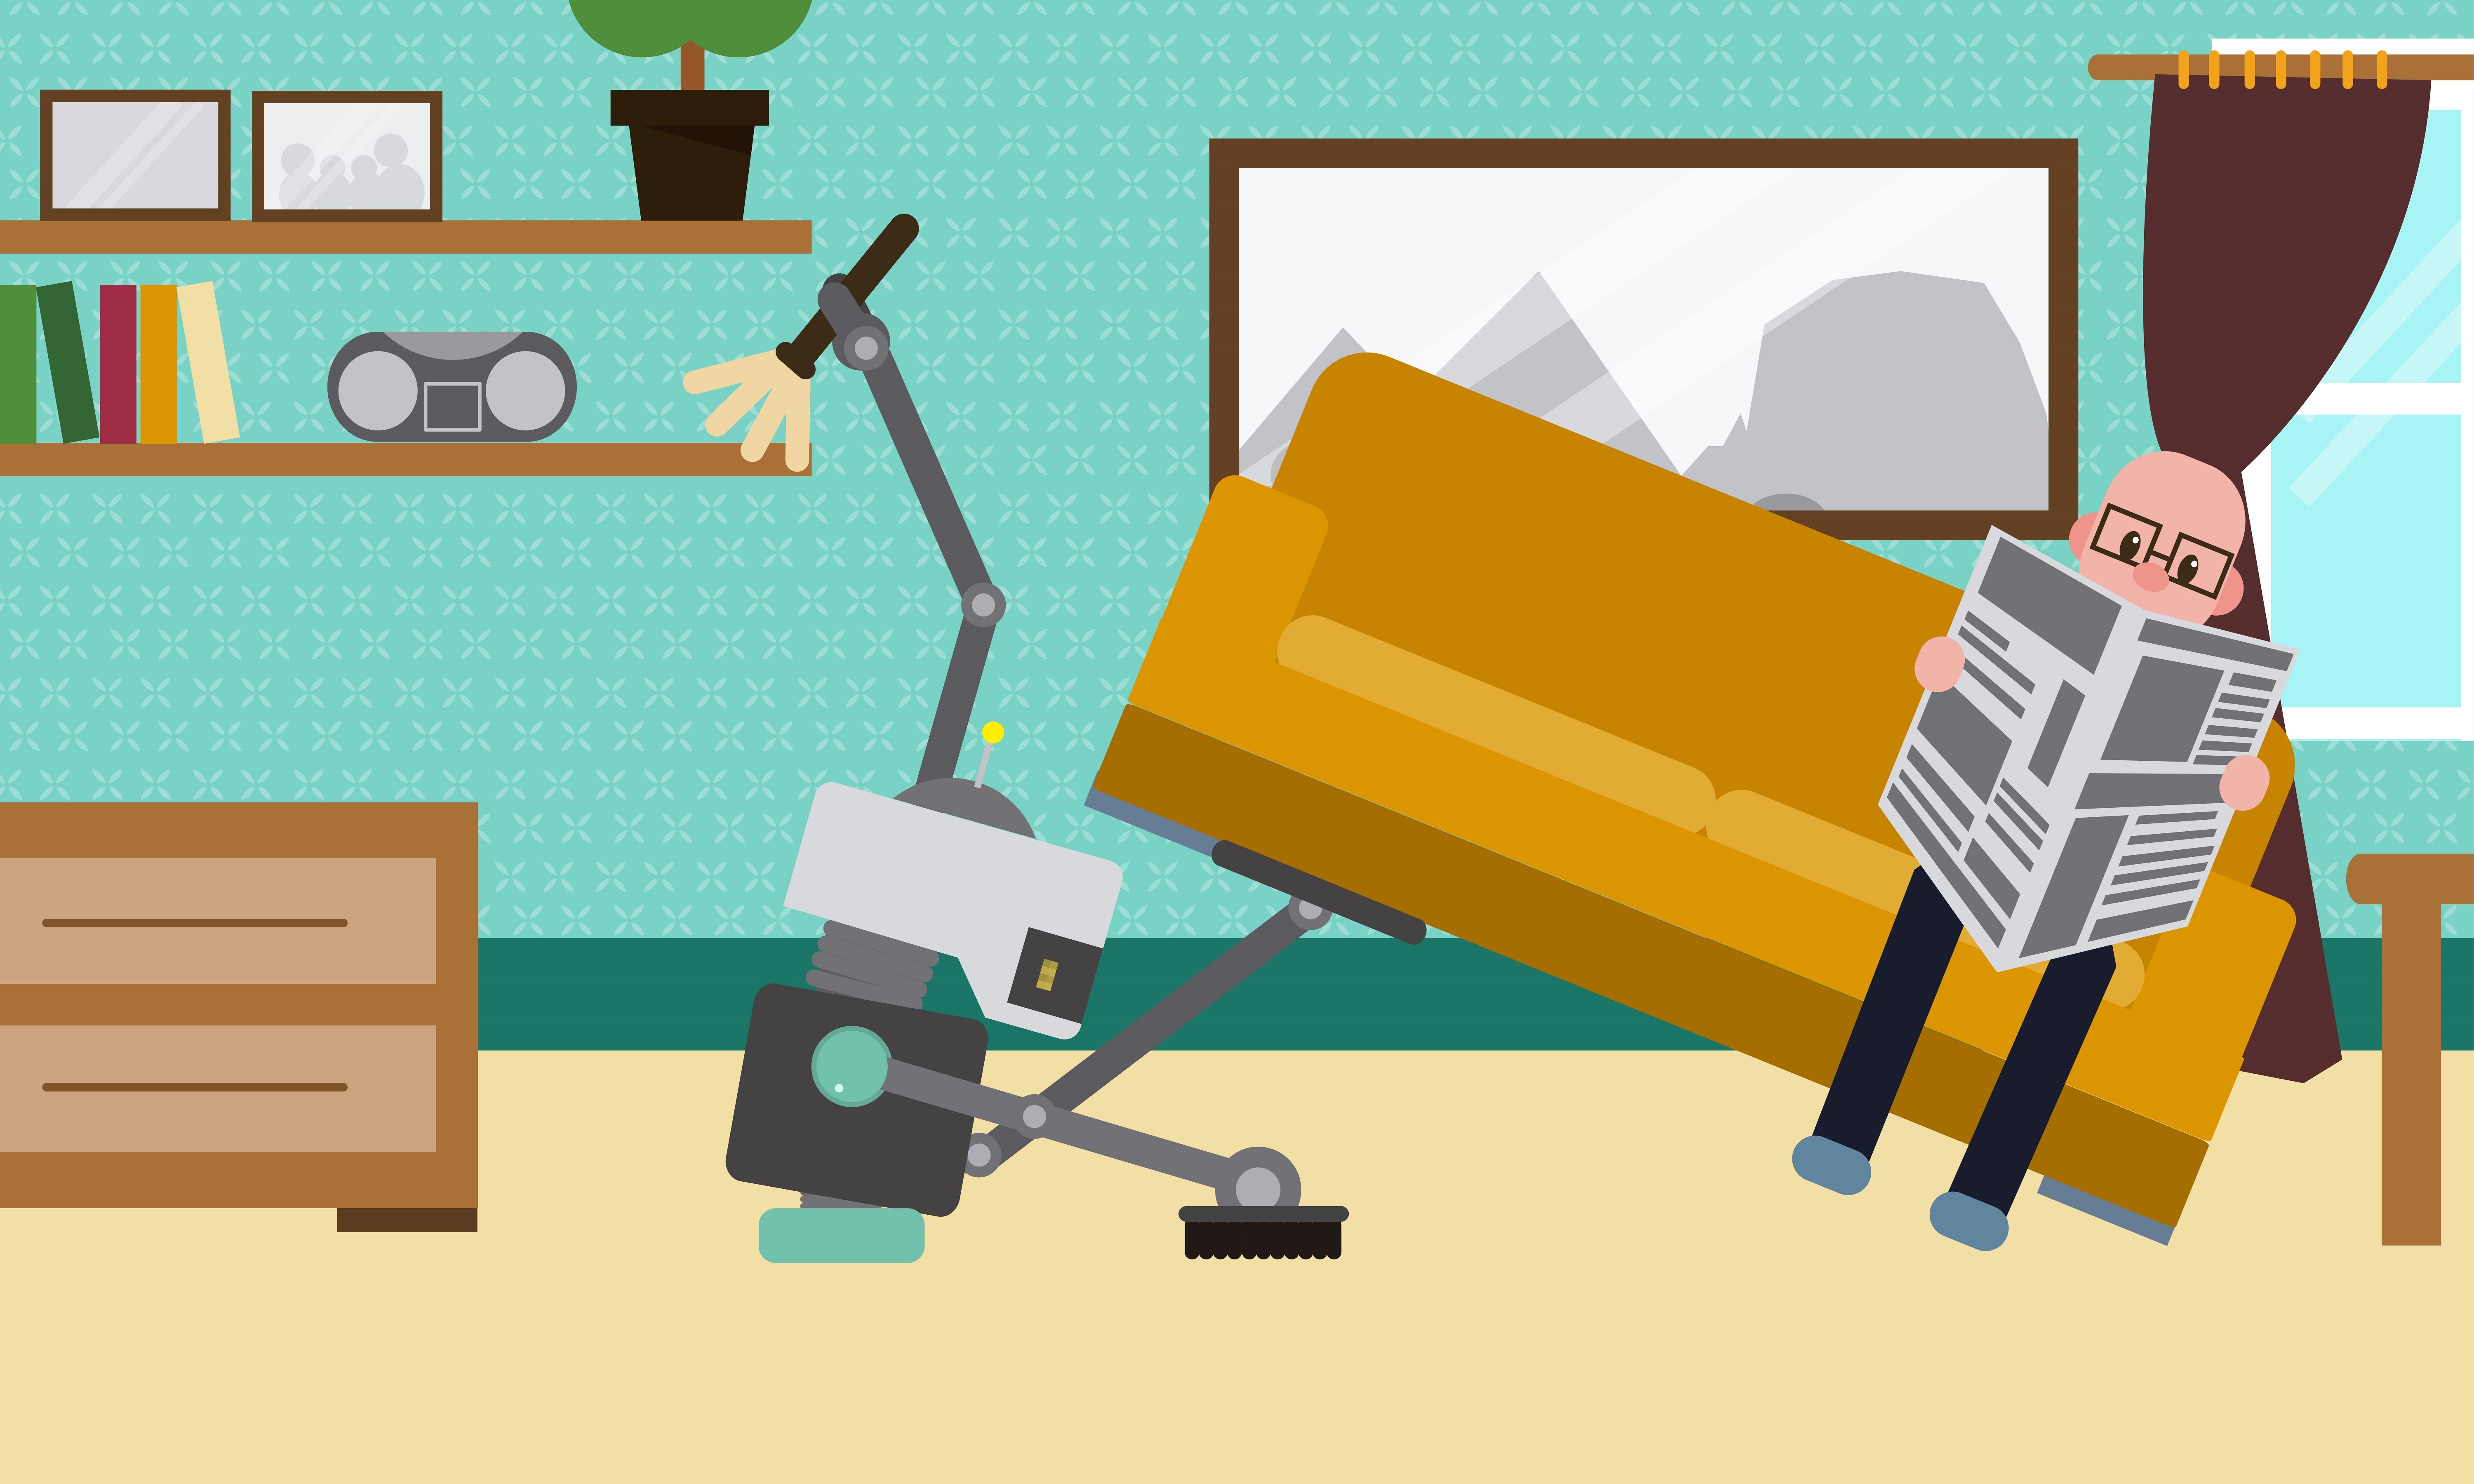 Illustration of a robot with 3 arms doing household cleaning while lifting the sofa up